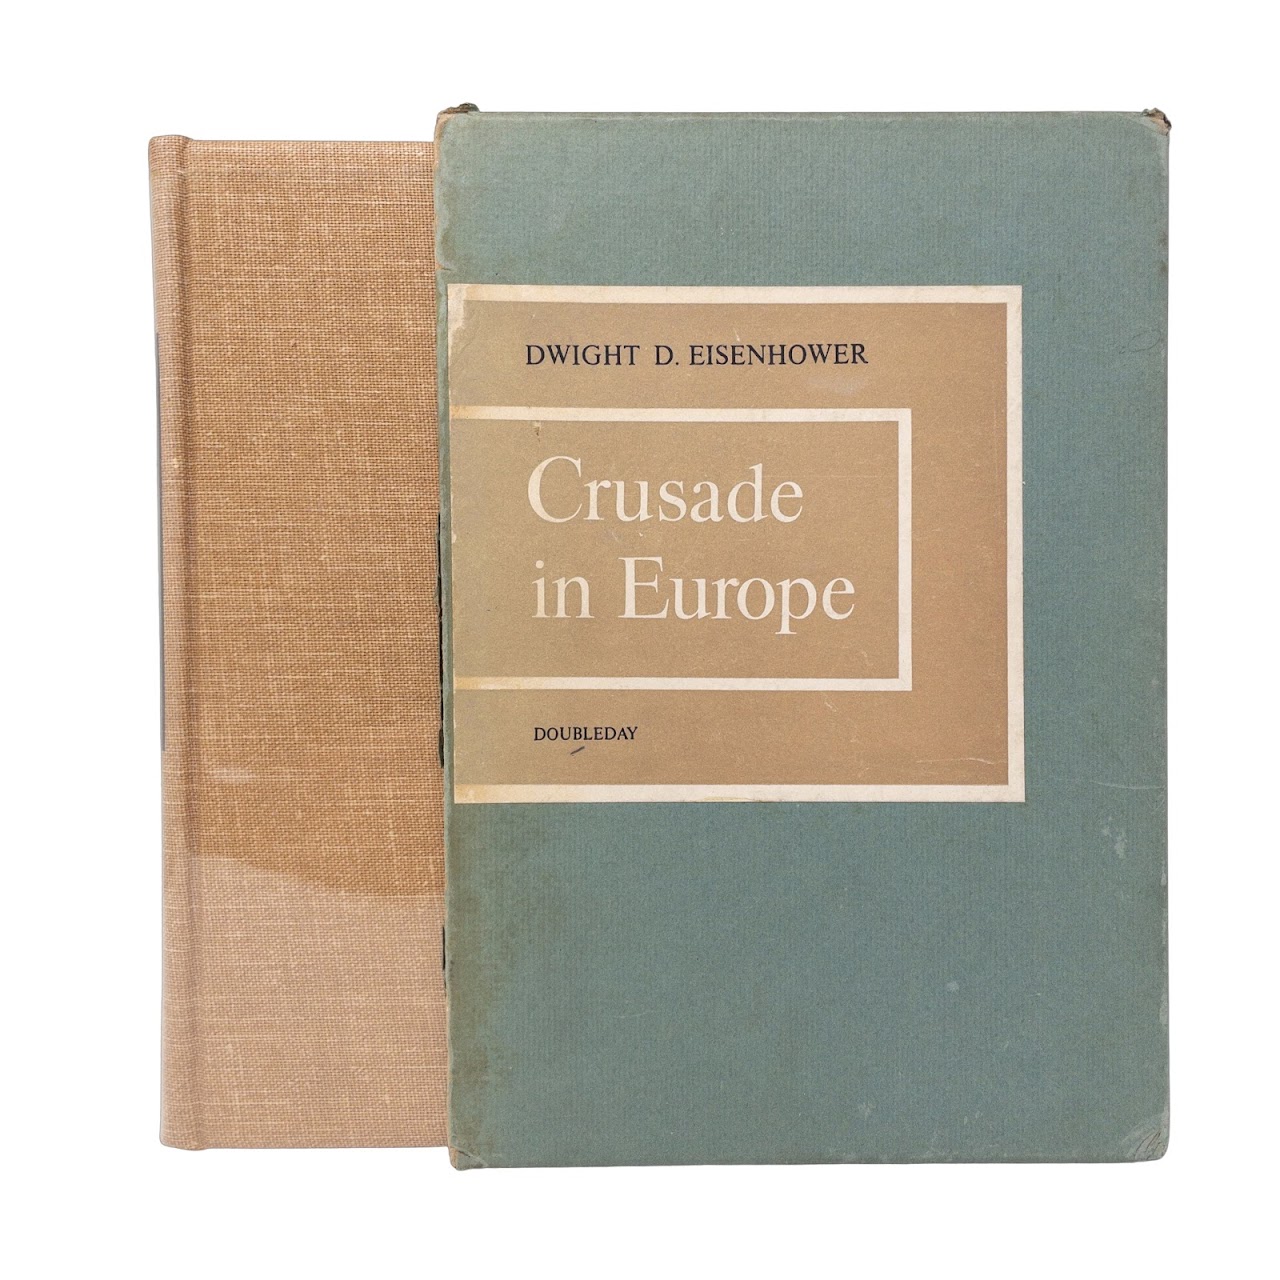 Dwight D. Eisenhower: SIGNED First Edition 'Crusade in Europe'